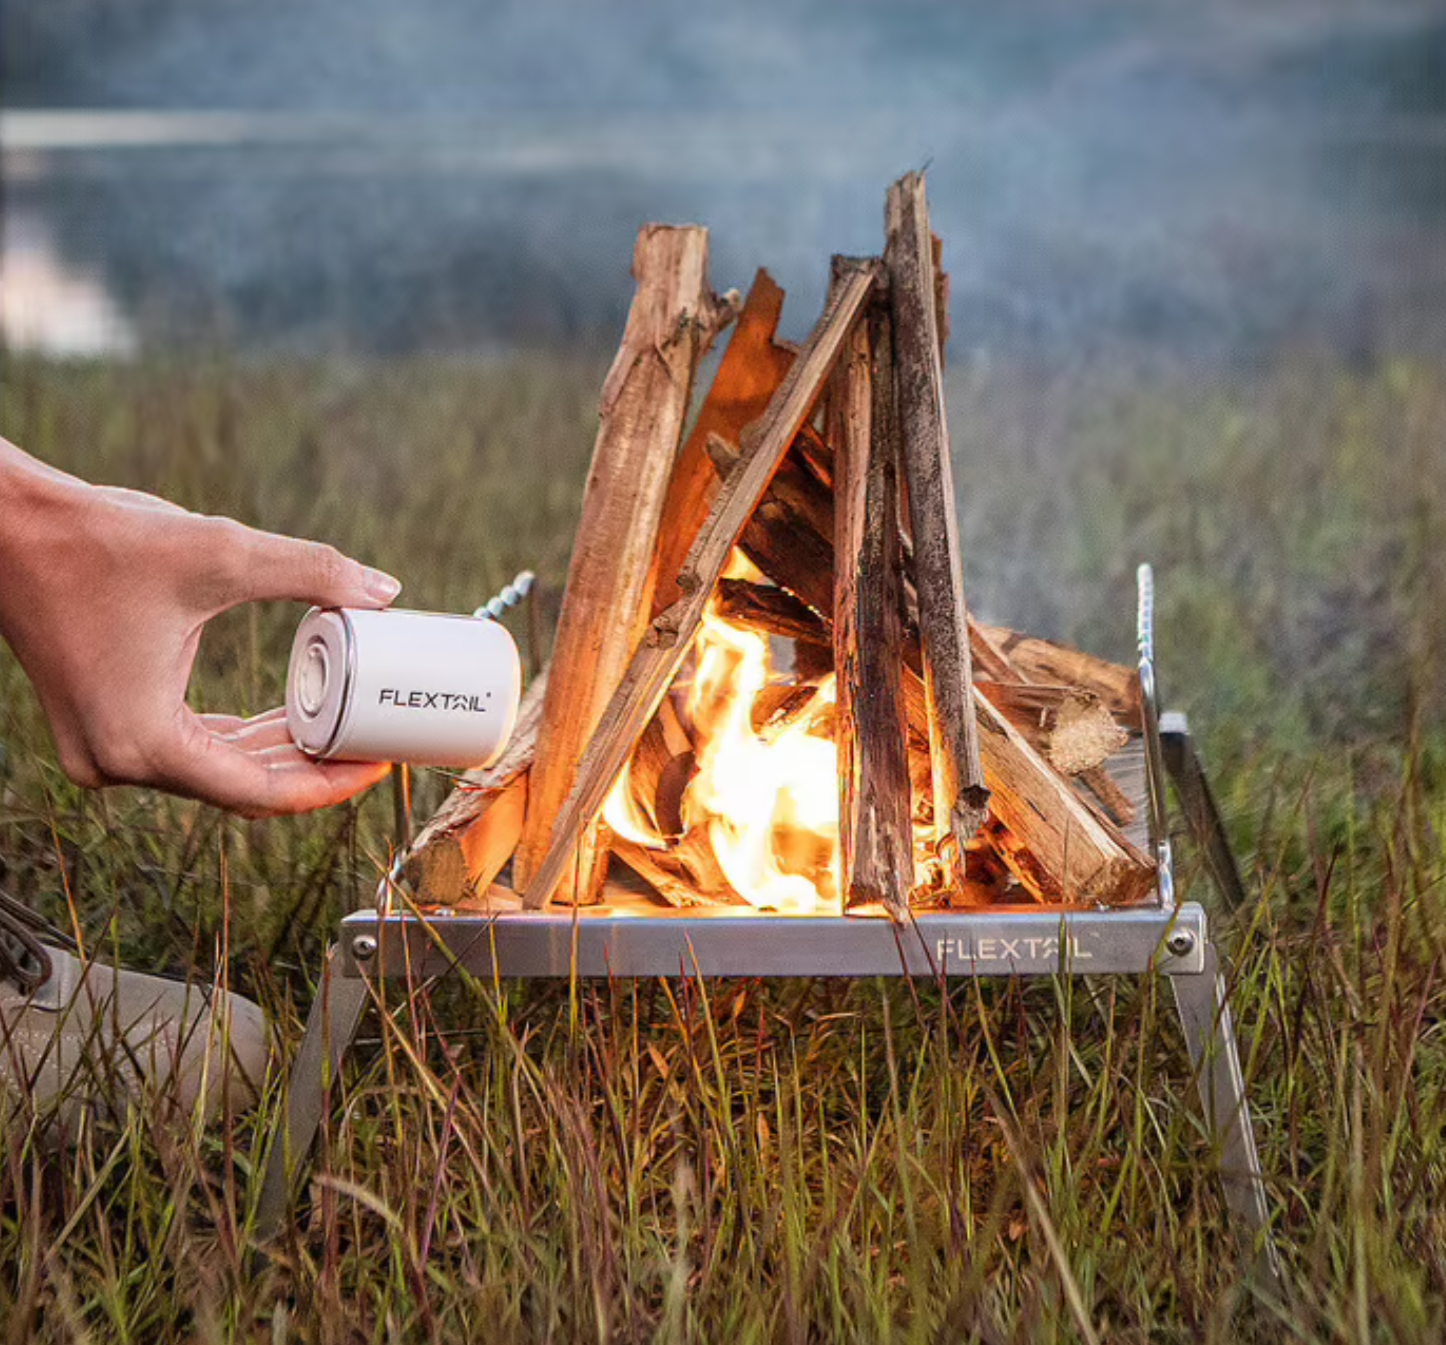 The Ultimate 3-in-1 Outdoor Tiny Pump and Camping Lamp